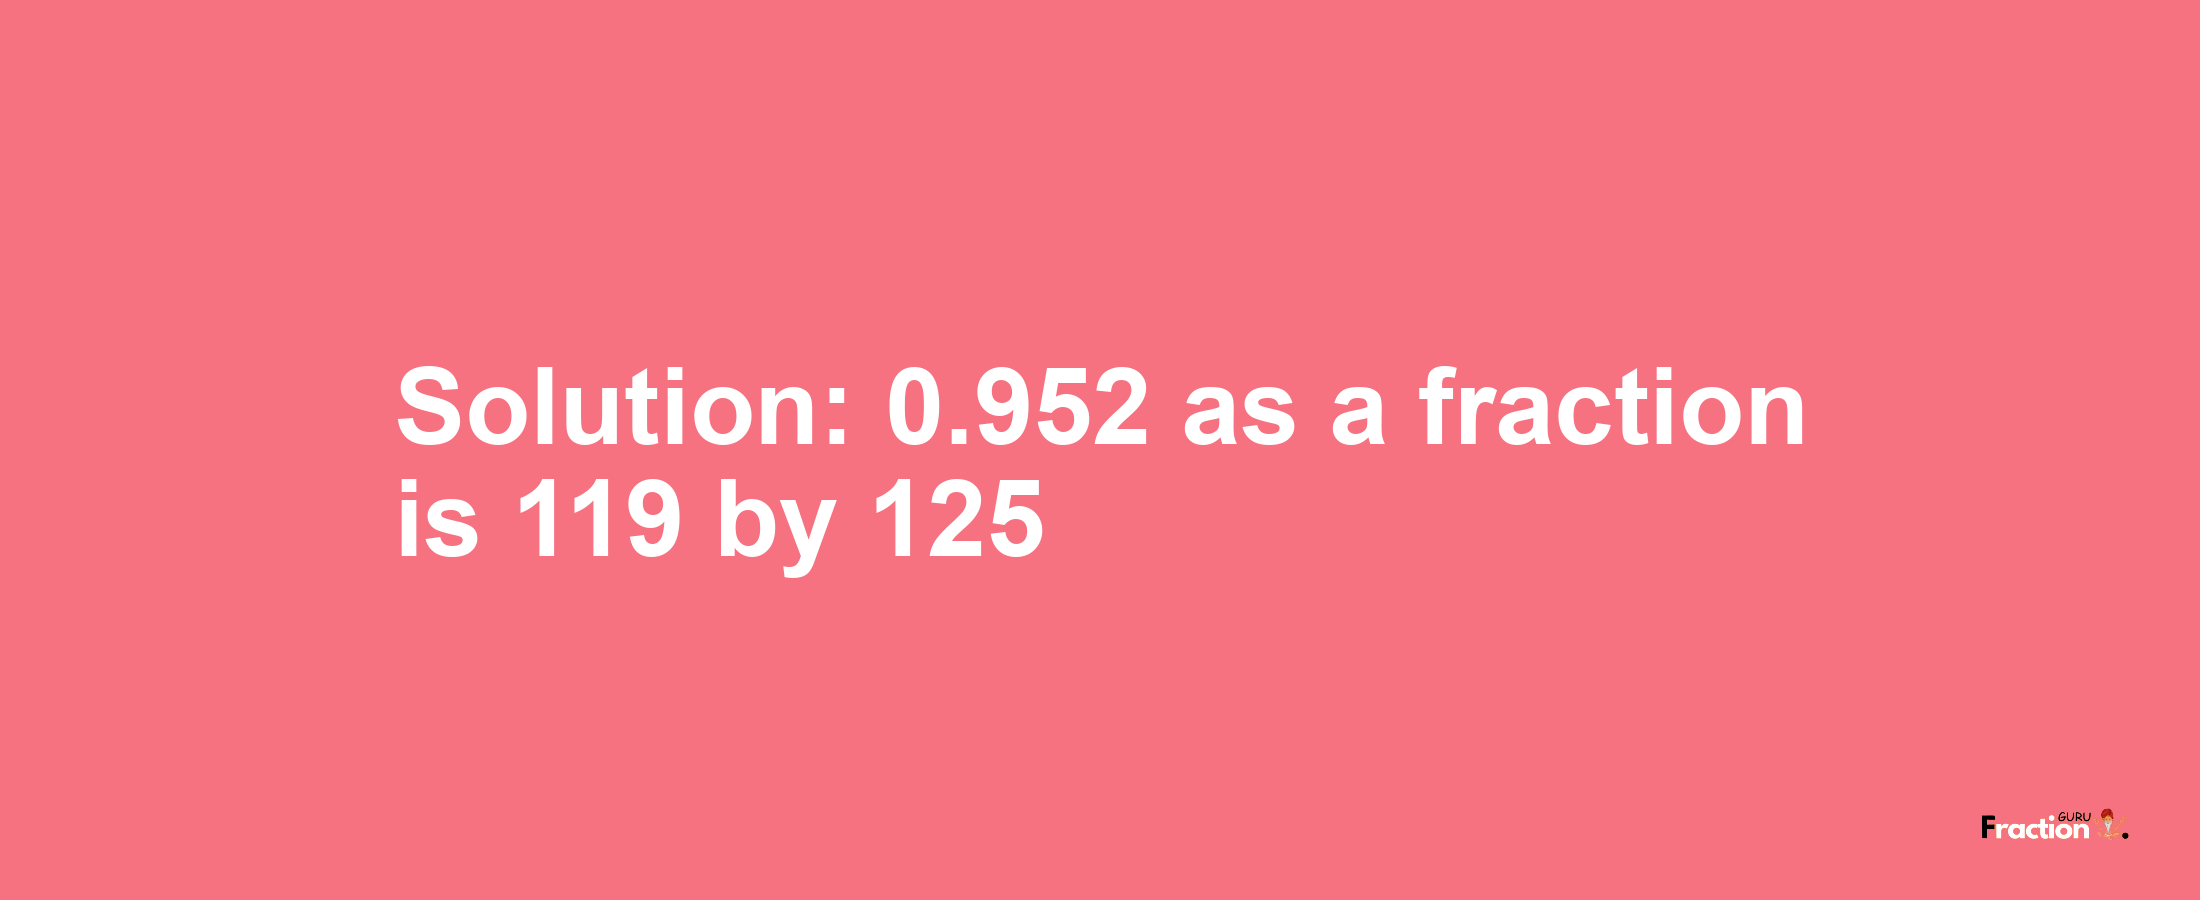 Solution:0.952 as a fraction is 119/125